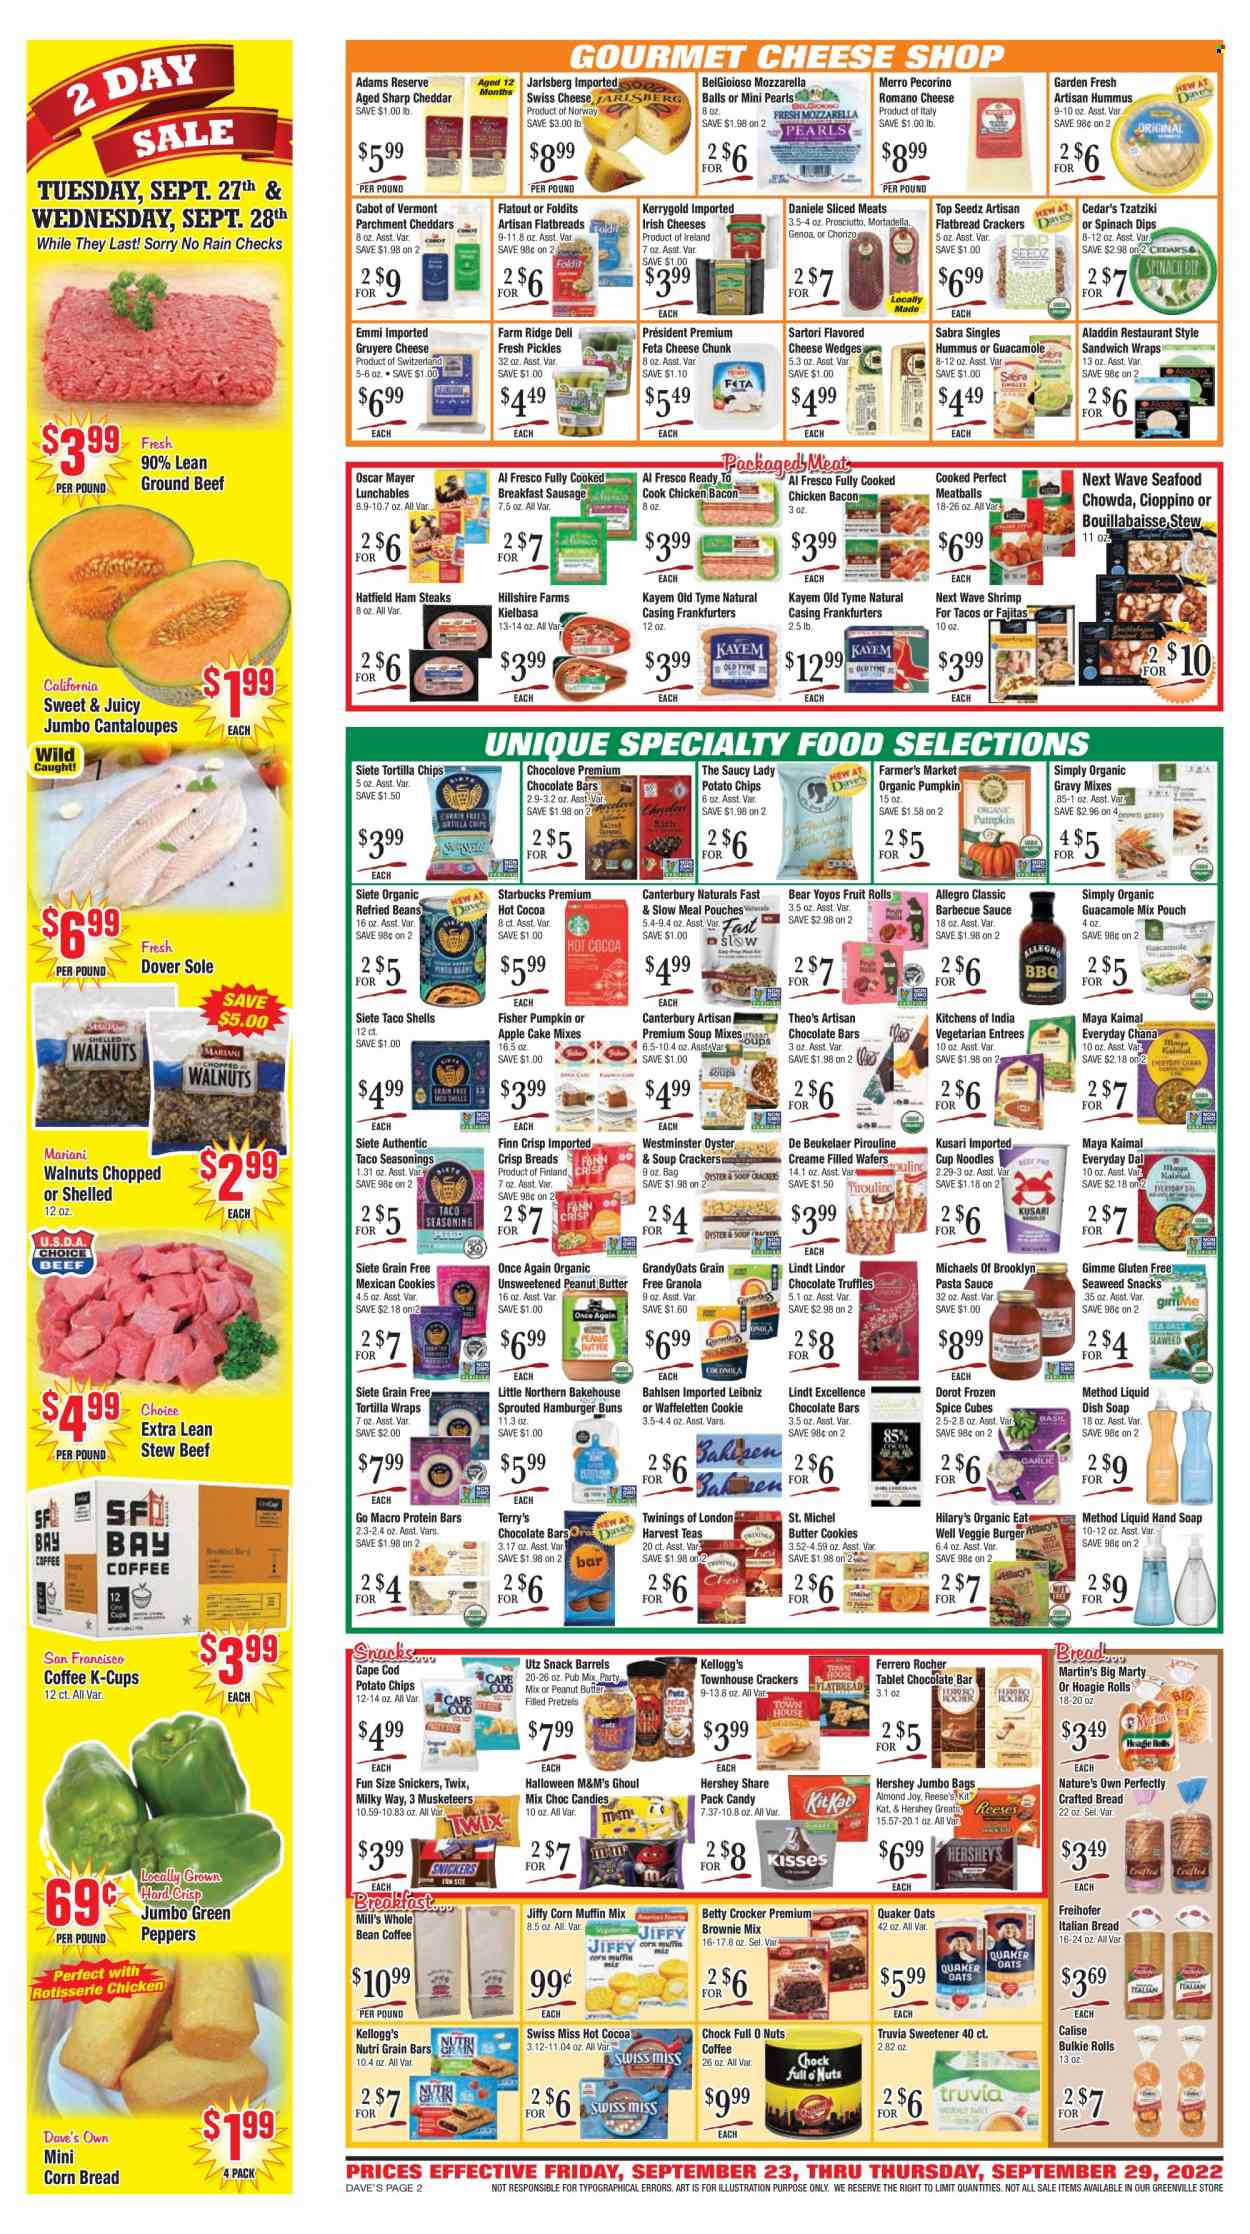 thumbnail - Dave's Fresh Marketplace Flyer - 09/23/2022 - 09/29/2022 - Sales products - bread, pretzels, cake, corn bread, buns, burger buns, flatbread, wraps, brownie mix, muffin mix, cantaloupe, pumpkin, peppers, cod, oysters, seafood, shrimps, pasta sauce, meatballs, sauce, noodles cup, fajita, Quaker, noodles, veggie burger, Lunchables, bacon, mortadella, ham, prosciutto, chorizo, Oscar Mayer, sausage, kielbasa, tzatziki, hummus, guacamole, ham steaks, Gruyere, swiss cheese, Pecorino, cheese, Président, feta, Swiss Miss, spinach dip, Reese's, cookies, wafers, butter cookies, snack, Lindt, Lindor, Ferrero Rocher, Milky Way, Snickers, Twix, truffles, KitKat, M&M's, crackers, Kellogg's, fruit rolls, chocolate bar, tortilla chips, potato chips, oats, corn muffin, sweetener, refried beans, pickles, granola, protein bar, Nutri-Grain, spice, BBQ sauce, walnuts, hot cocoa, Twinings, coffee, Starbucks, coffee capsules, K-Cups, beer, beef meat, ground beef, steak, Jiffy, Nature's Own. Page 2.